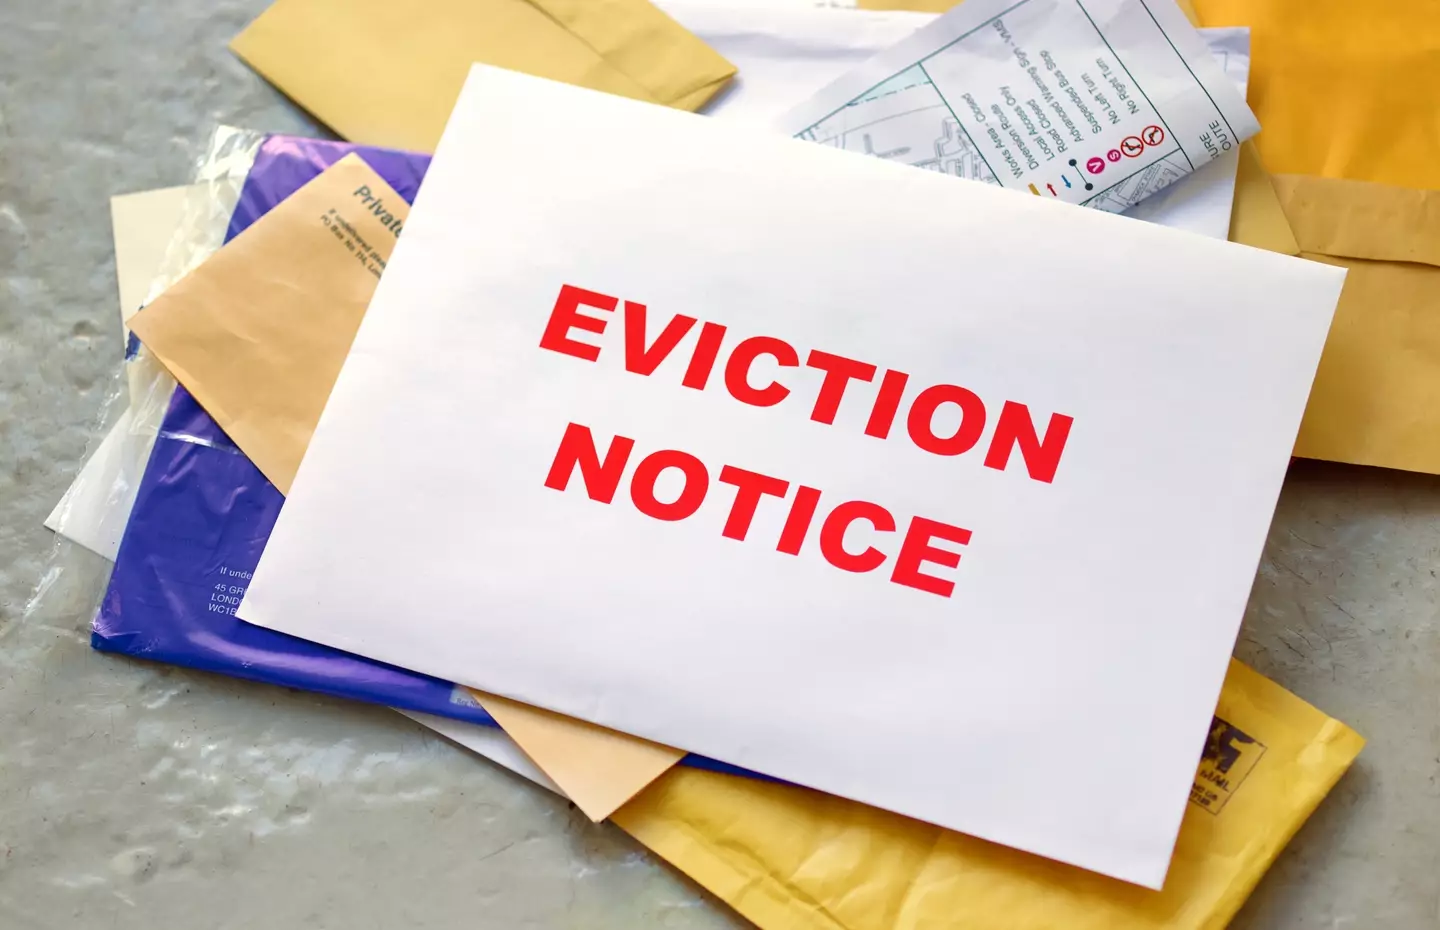 The two sons have now been handed an eviction notice.